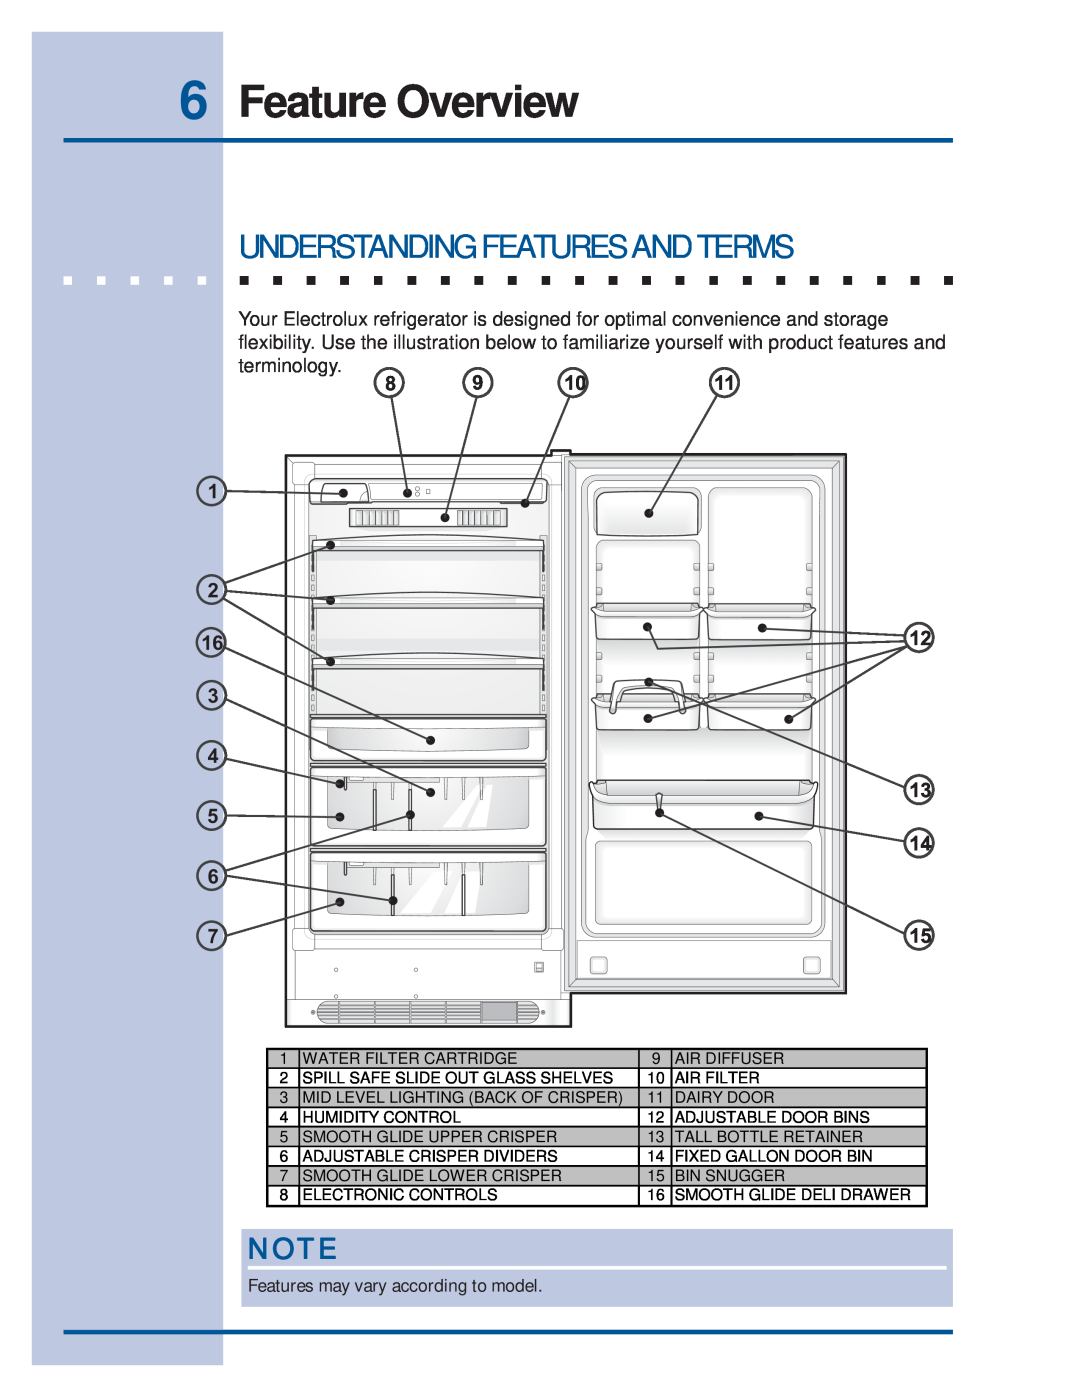 Electrolux 297122800 (0608) manual Feature Overview, Understanding Features And Terms, Features may vary according to model 